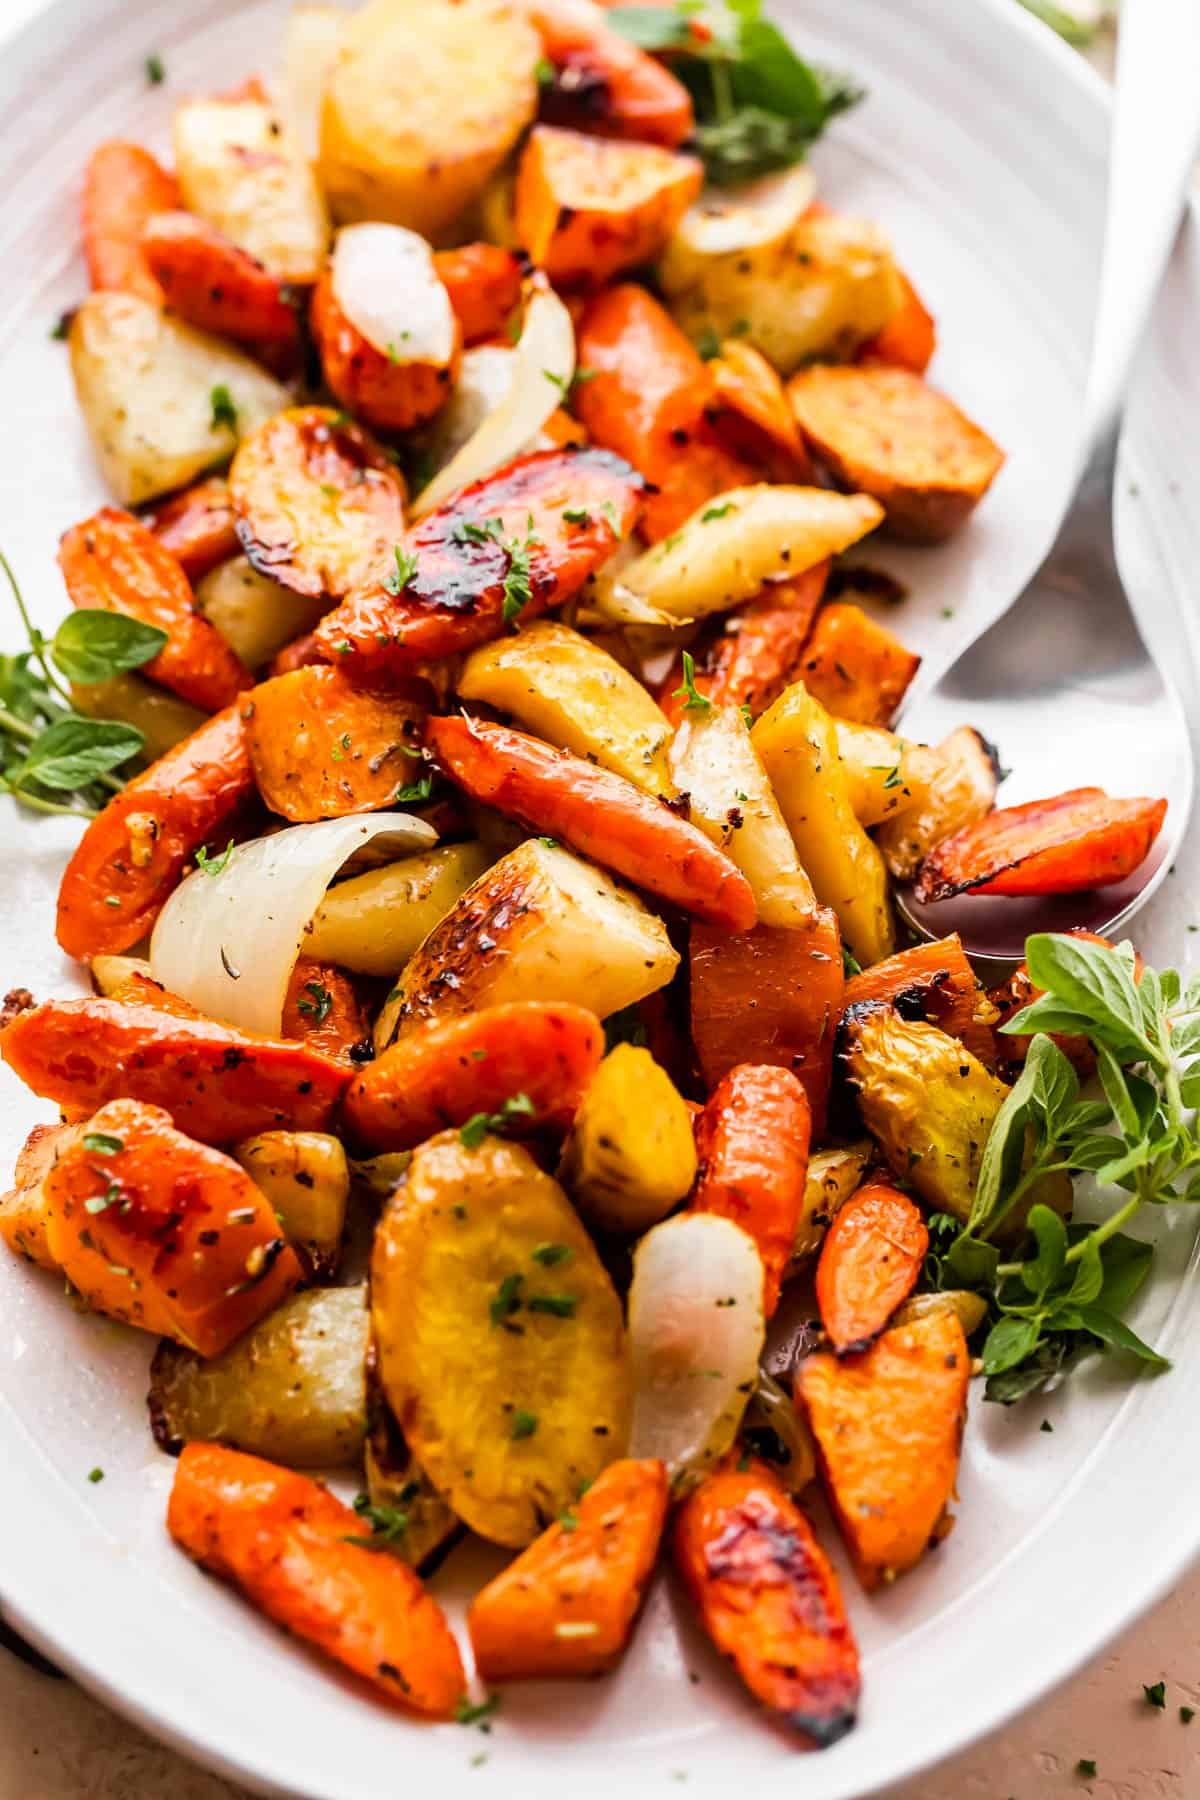 roasted chopped carrots, parsnips, sweet potatoes, and onions served on an oval plate